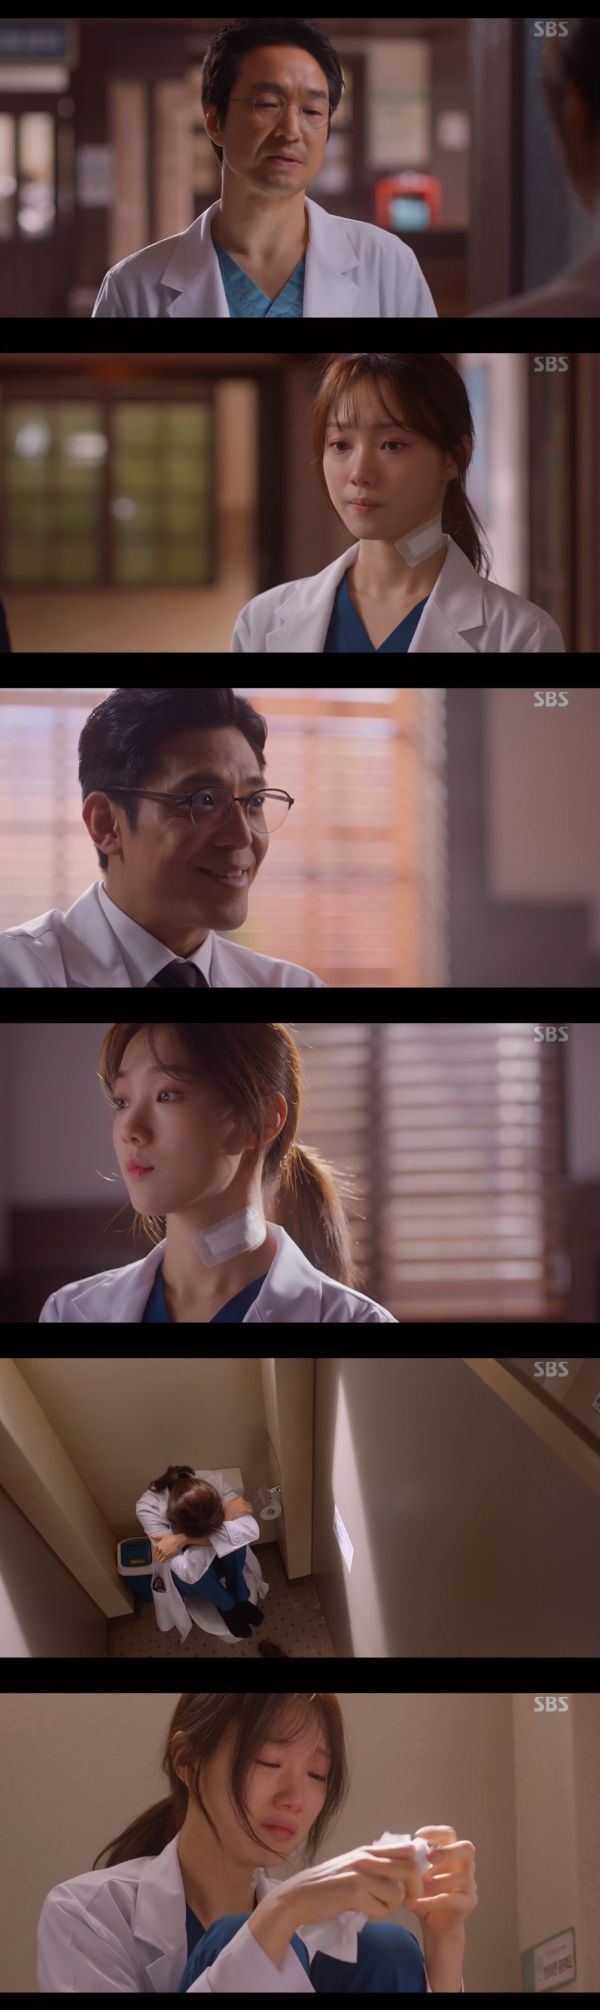 Lee Sung-kyung poured out tears.In the SBS monthly drama Romantic Doctor Kim Sabu 2 (playplayed by Kang Eun-kyung, directed by Yoo In-sik Lee Gil-bok), which was broadcast on the 27th, Cha Eun-jae (Lee Sung-kyung), who was involved in the Domestic violence incident, poured tears after bowing his Waist to the attacker.On the day of the broadcast, Park Min-guk told Kim Sabu, Go quietly and smoothly, with the injury of Cha Eun-jae.It is best for the hospital and for the teacher to pass by for the sake of the hospital, he added.If the doctor was injured in the hospital and I was in an emergency if I was wrong, Kim said. If I can not do that, Park said.If you do not want to act as a surgeon, you can put out the place. With this behind him, Cha Eun-jae said from Yang Ho-joon (Go Sang-ho) Think well from now on and get on the route.Stop hating me, he said, and decided to apologize to the Dominican violence attackr.Kim said to Cha Eun-jae, What will you do to apologize for? A person who has been hurt by the weak who are being abused.When Cha Eun-jae said, I do not want to make the problem bigger anymore, Kim Sabu said, Have you ever thought that many Choices who wanted to make your mind comfortable in that way are making a bigger problem?Kim said, If everything becomes easy and natural with such excuses, you will eventually live a cheap life no matter what you are treated.Nevertheless, Cha Eun-jae bent Waist to the Dominican violence attackr; Park Min-guk said, Good job.If you have a major accident since the first day of your new visit, you should take responsibility for it. You have an hour.Lets get it straight and get out, he turned.In the end, Cha Eun-jae poured tears alone, saying, Even if I was treated like that, I became a cheap life.